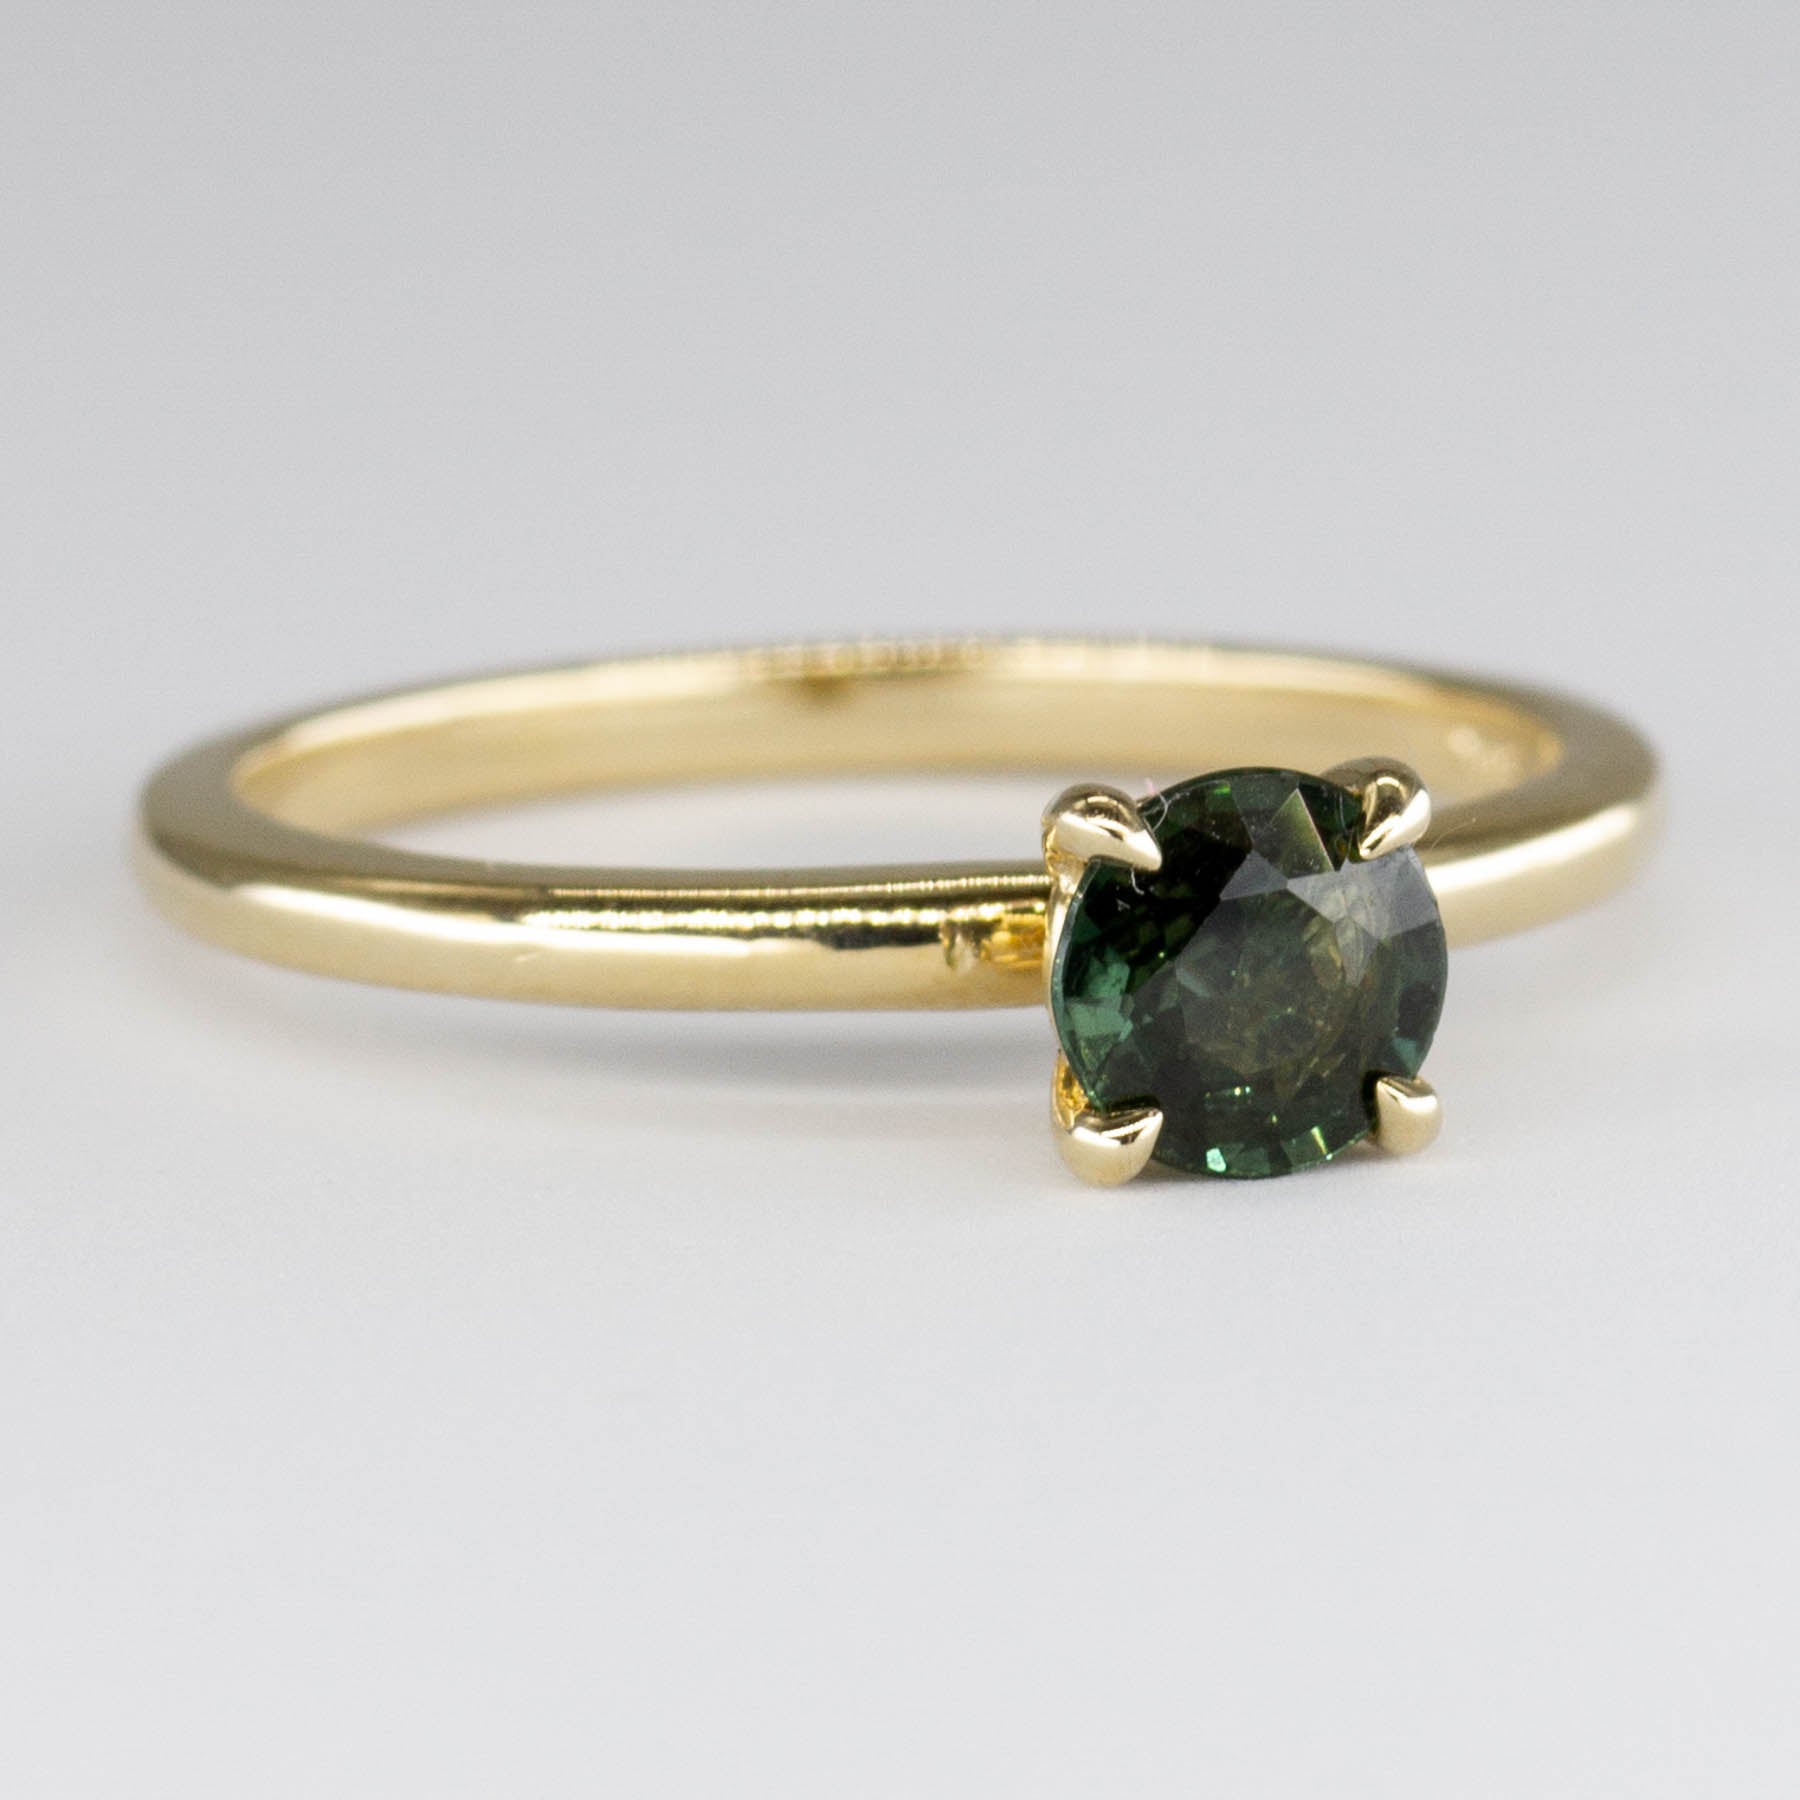 '100 Ways' 14k Yellow Gold Sapphire Solitaire Ring | 0.30ct | SZ 7 - 100 Ways